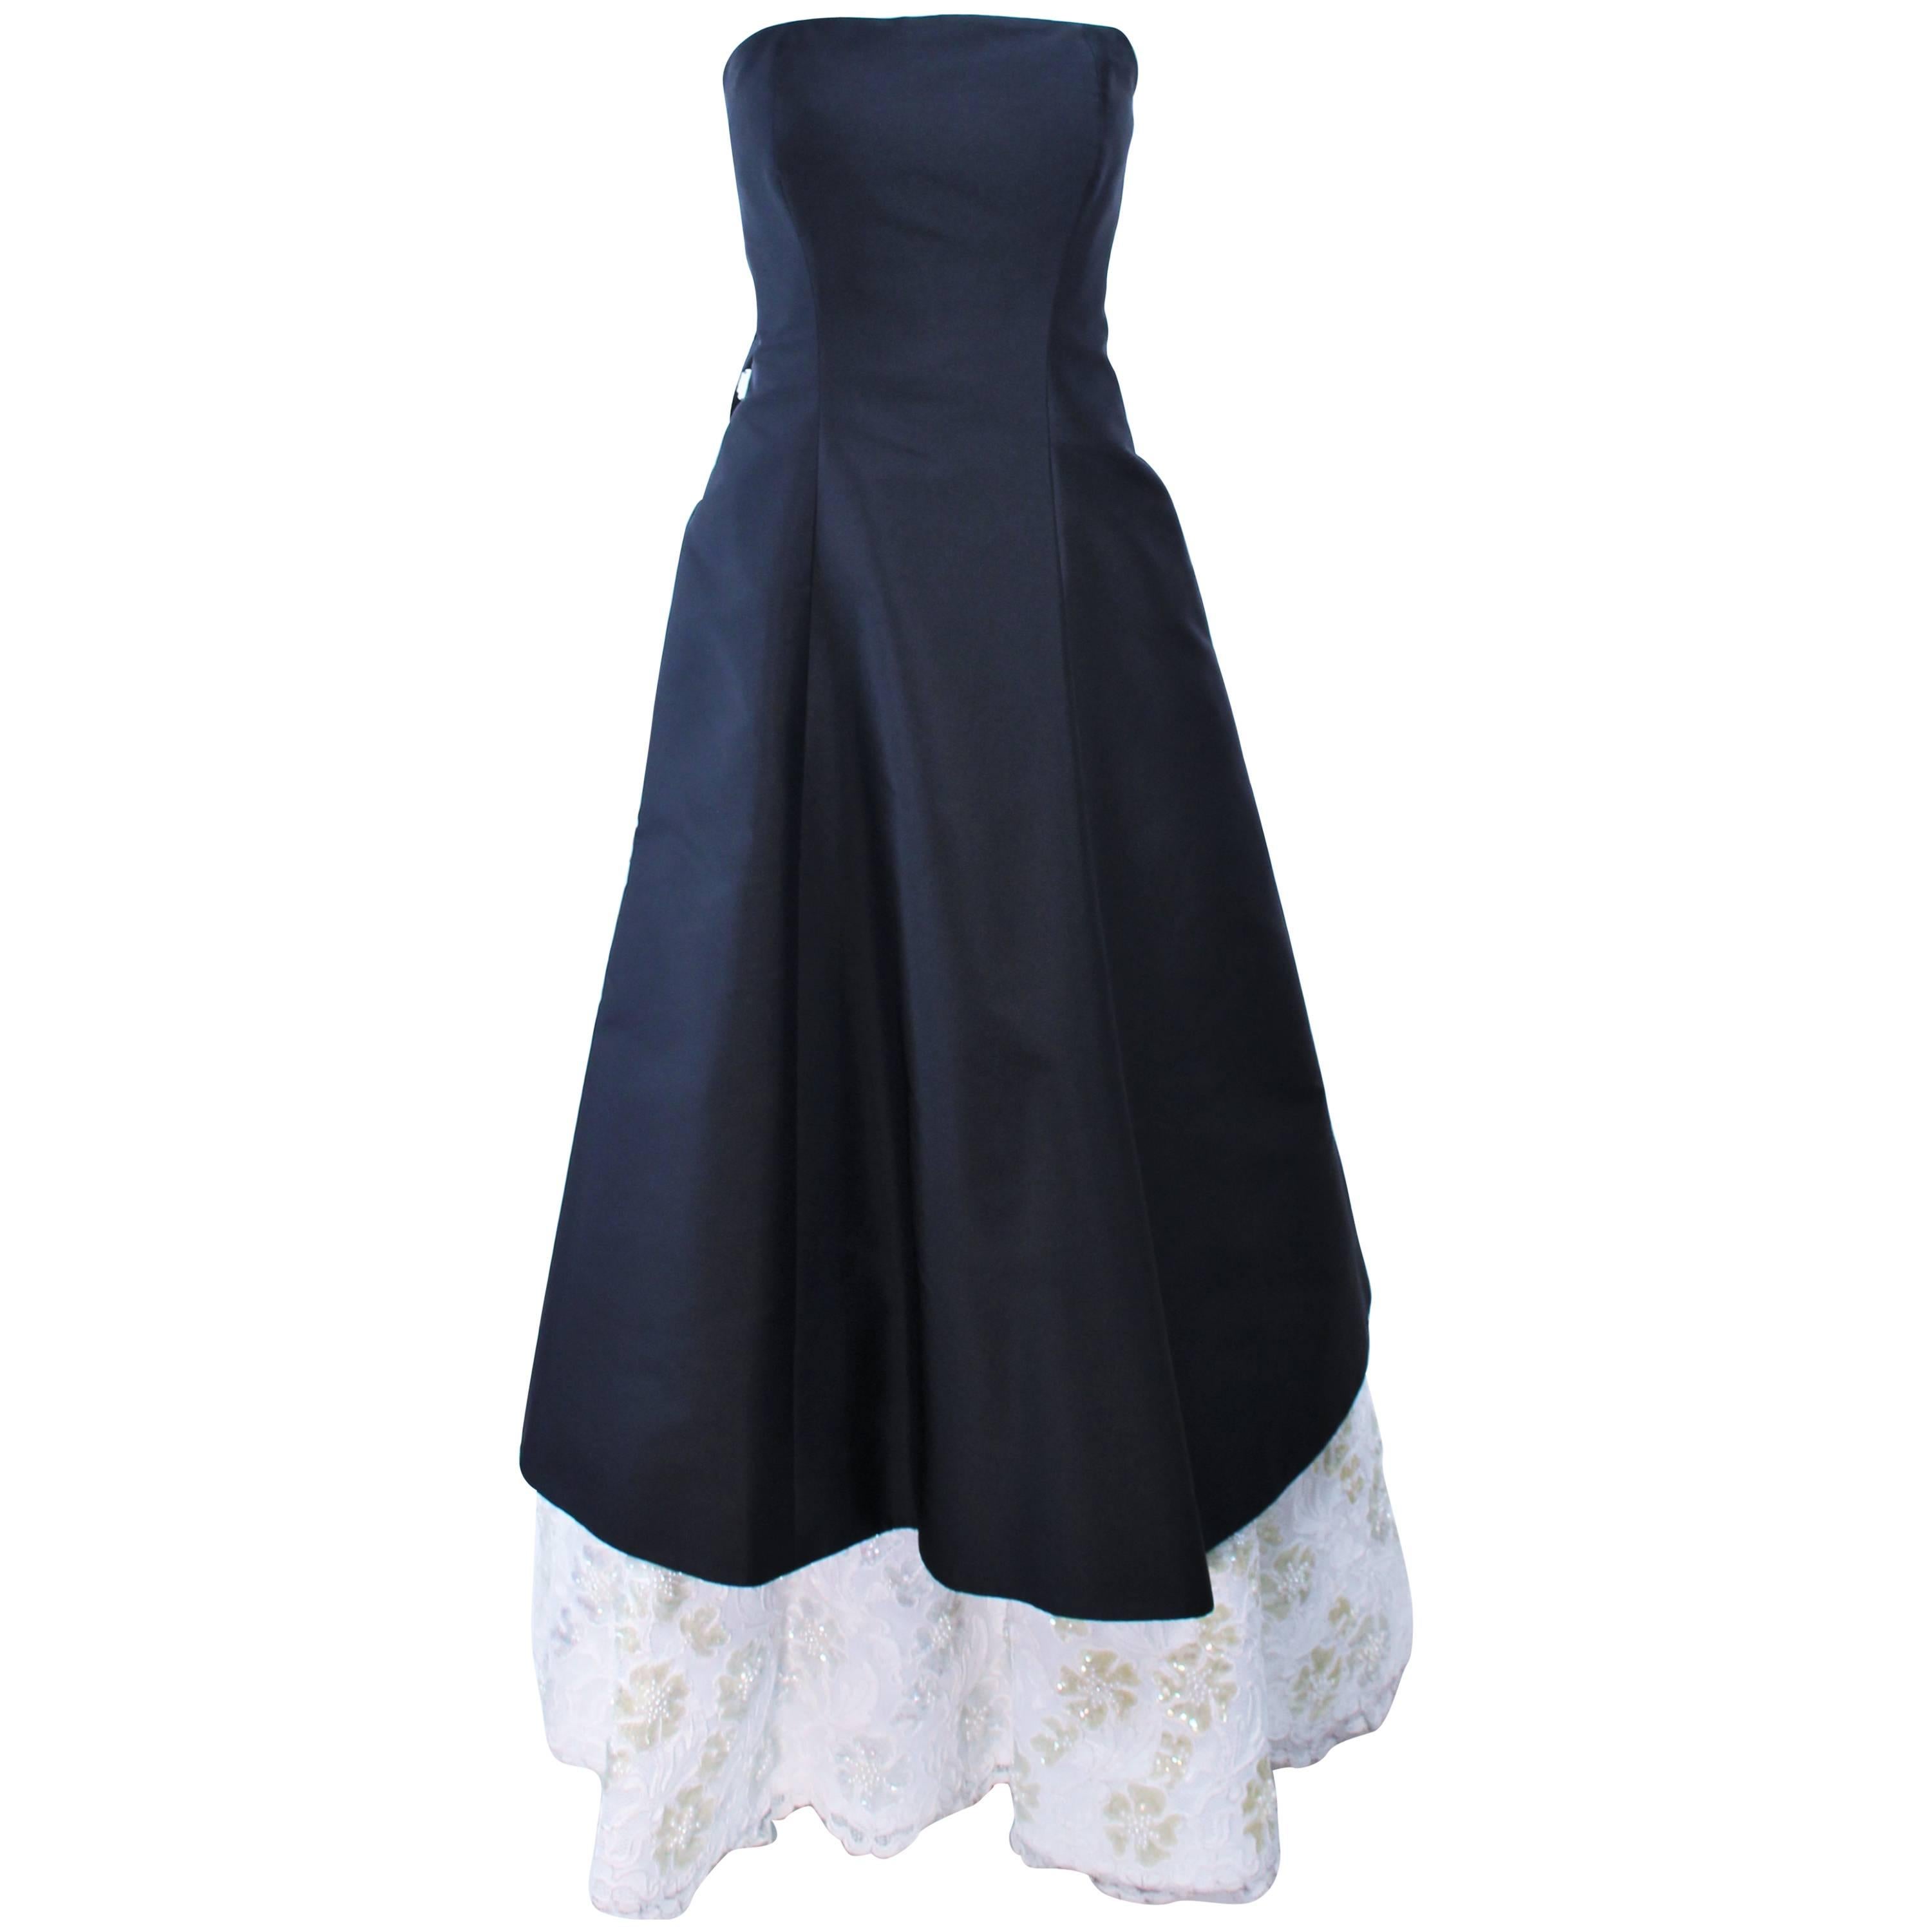 SAM CARLIN Black Silk Gown with White Sequin Lace Accents Size 6 For Sale